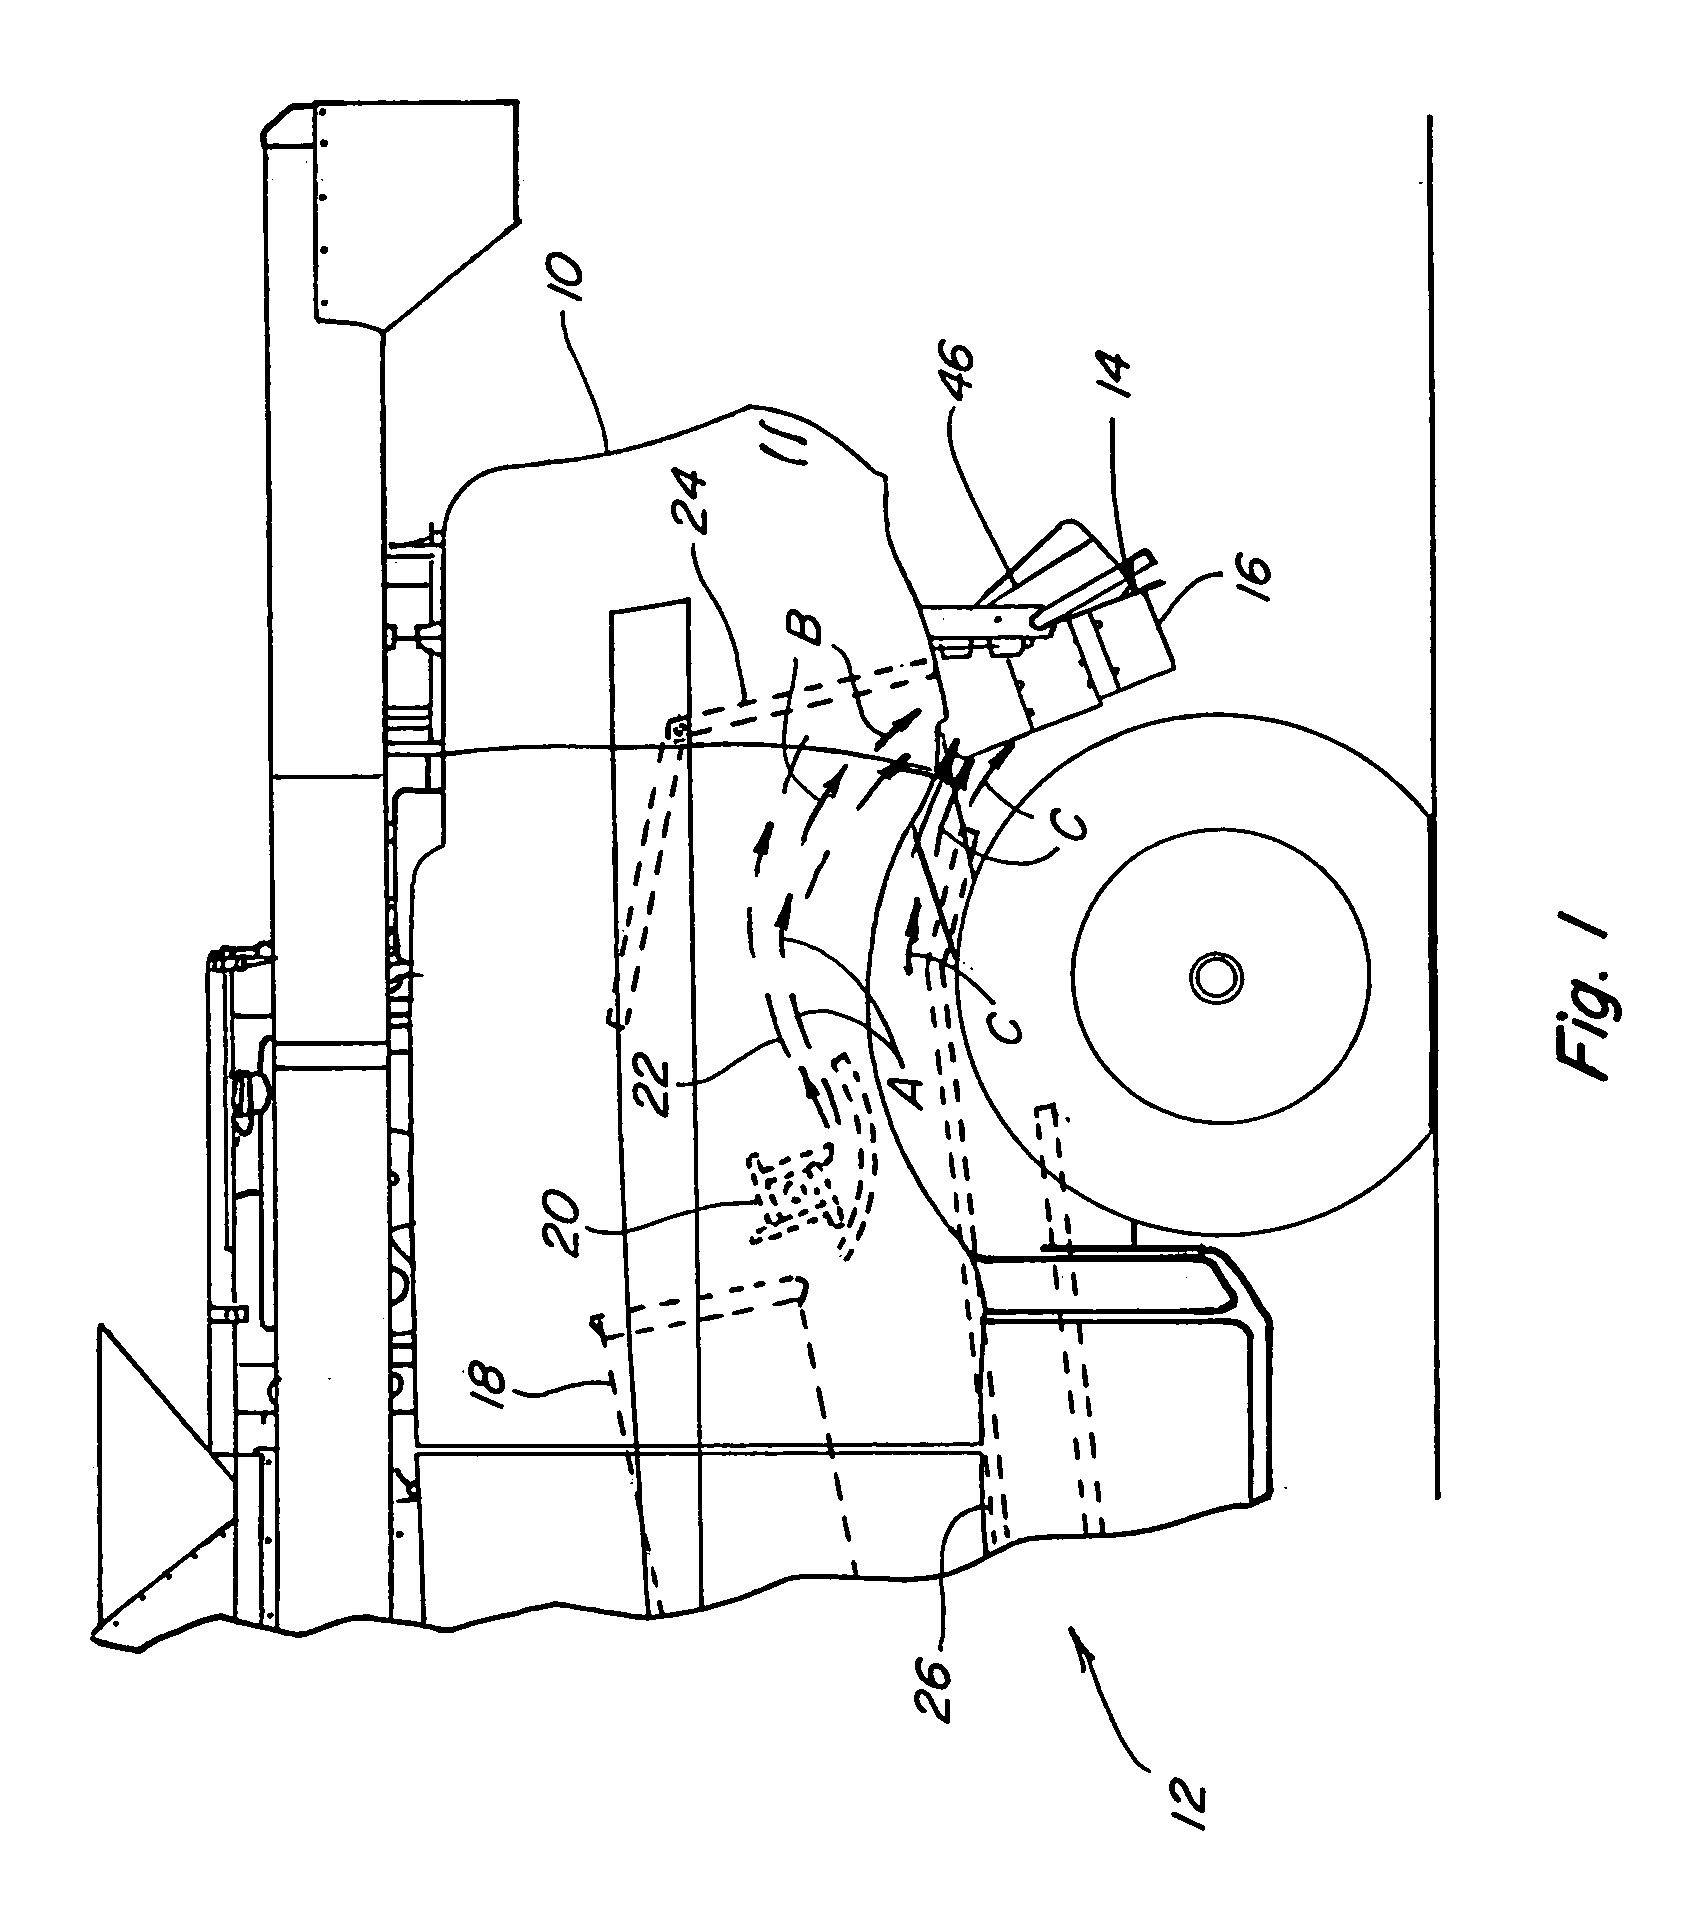 Rotary accelerating apparatus for a vertical straw and chaff spreader of an agricultural combine